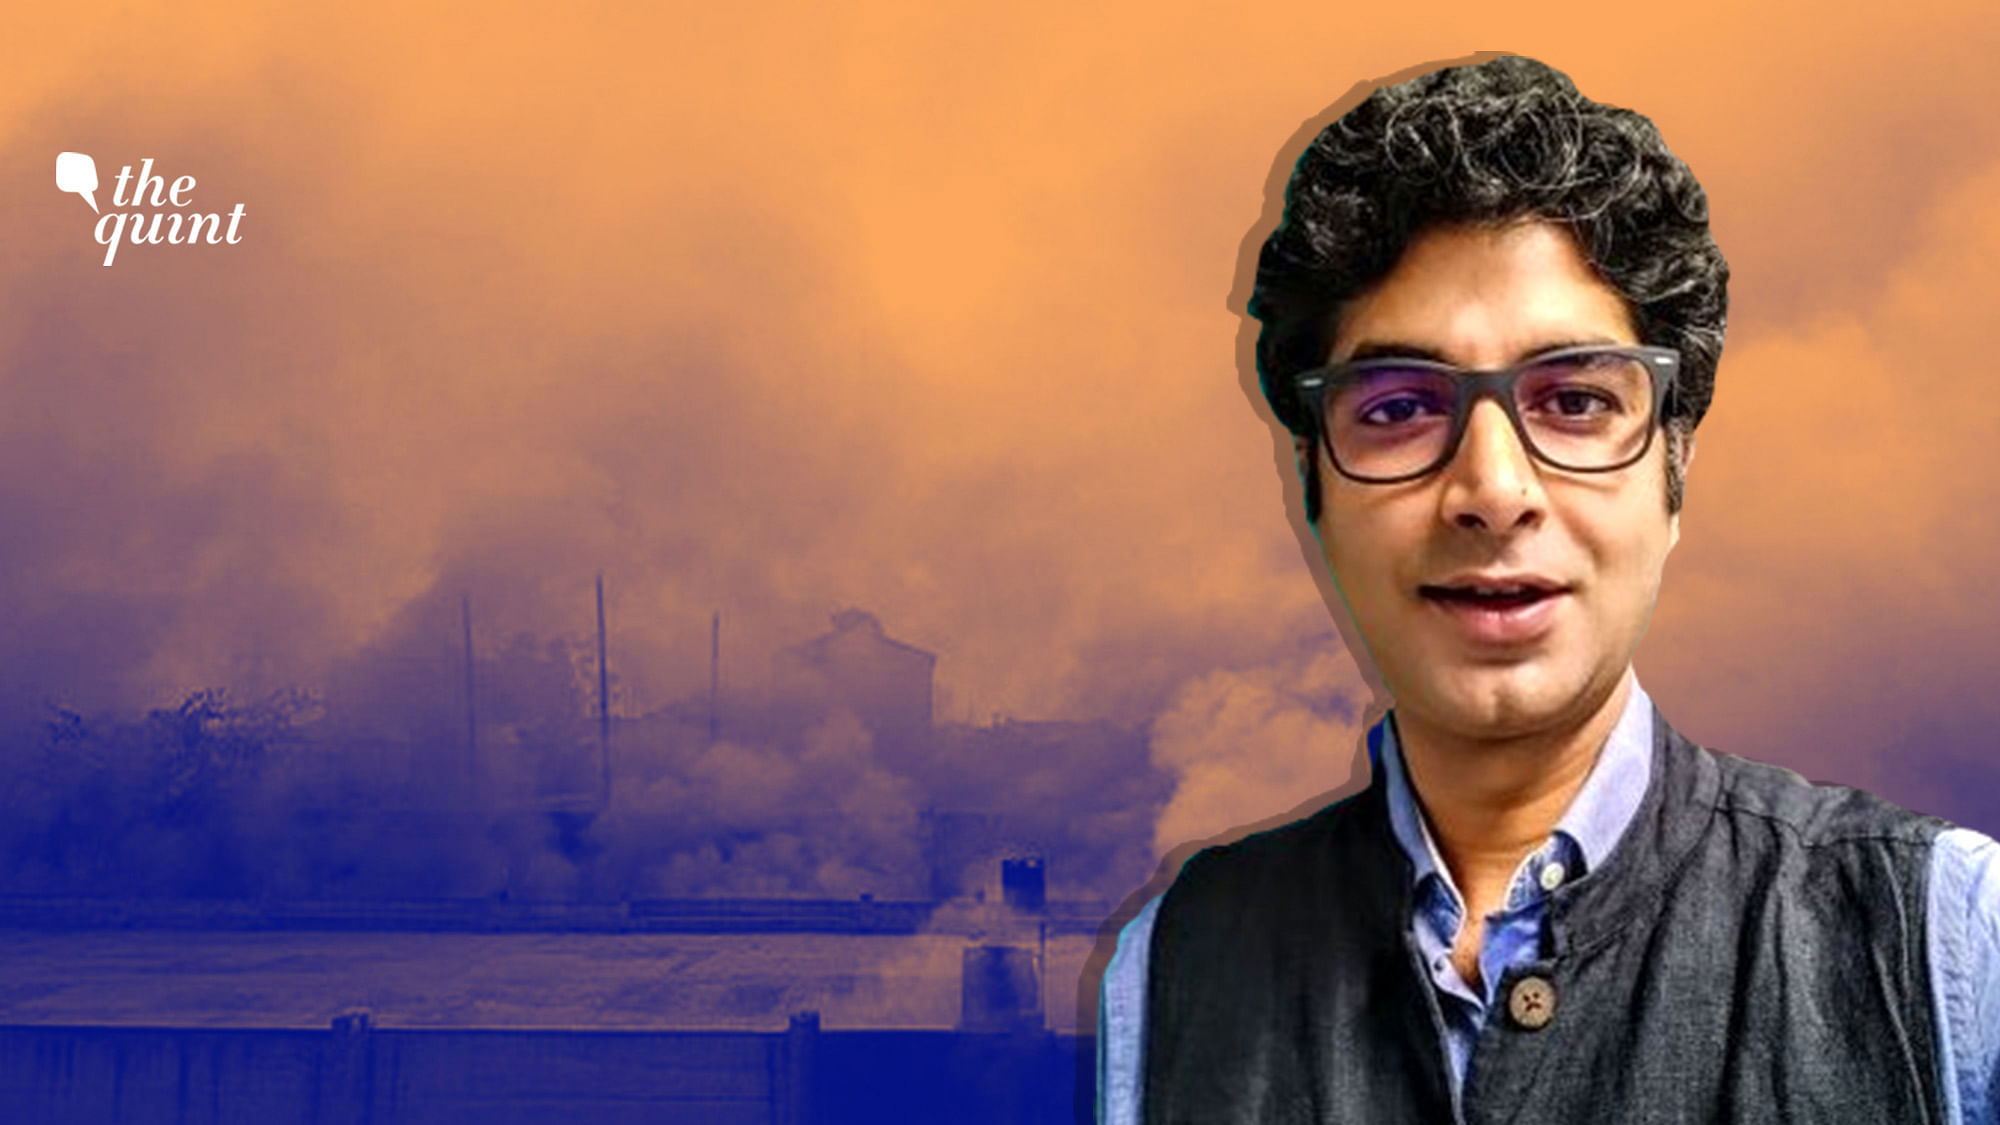 Vimlendu Jha pointed out how the Centre blames the state and vice versa, and how not much really gets done to combat the pollution problem, in the process.